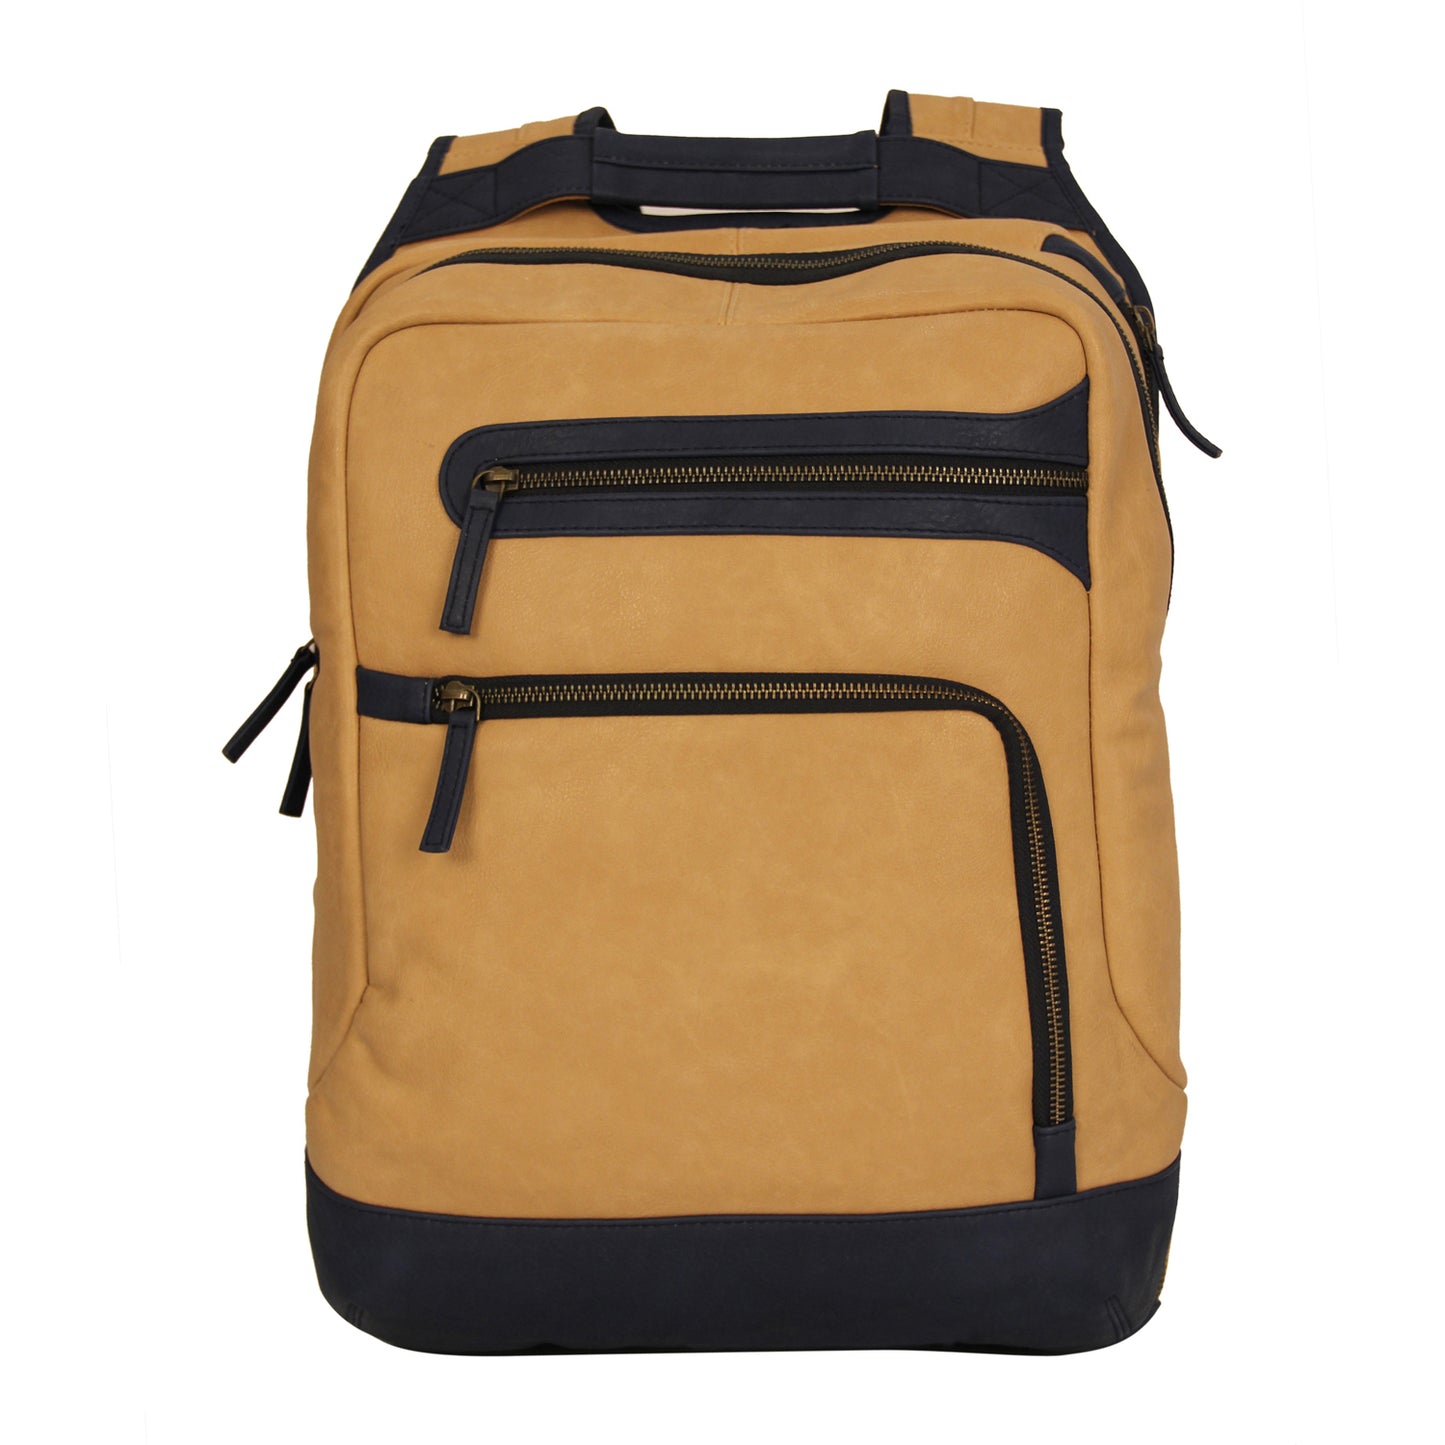 Unisex Faux Leather Backpack